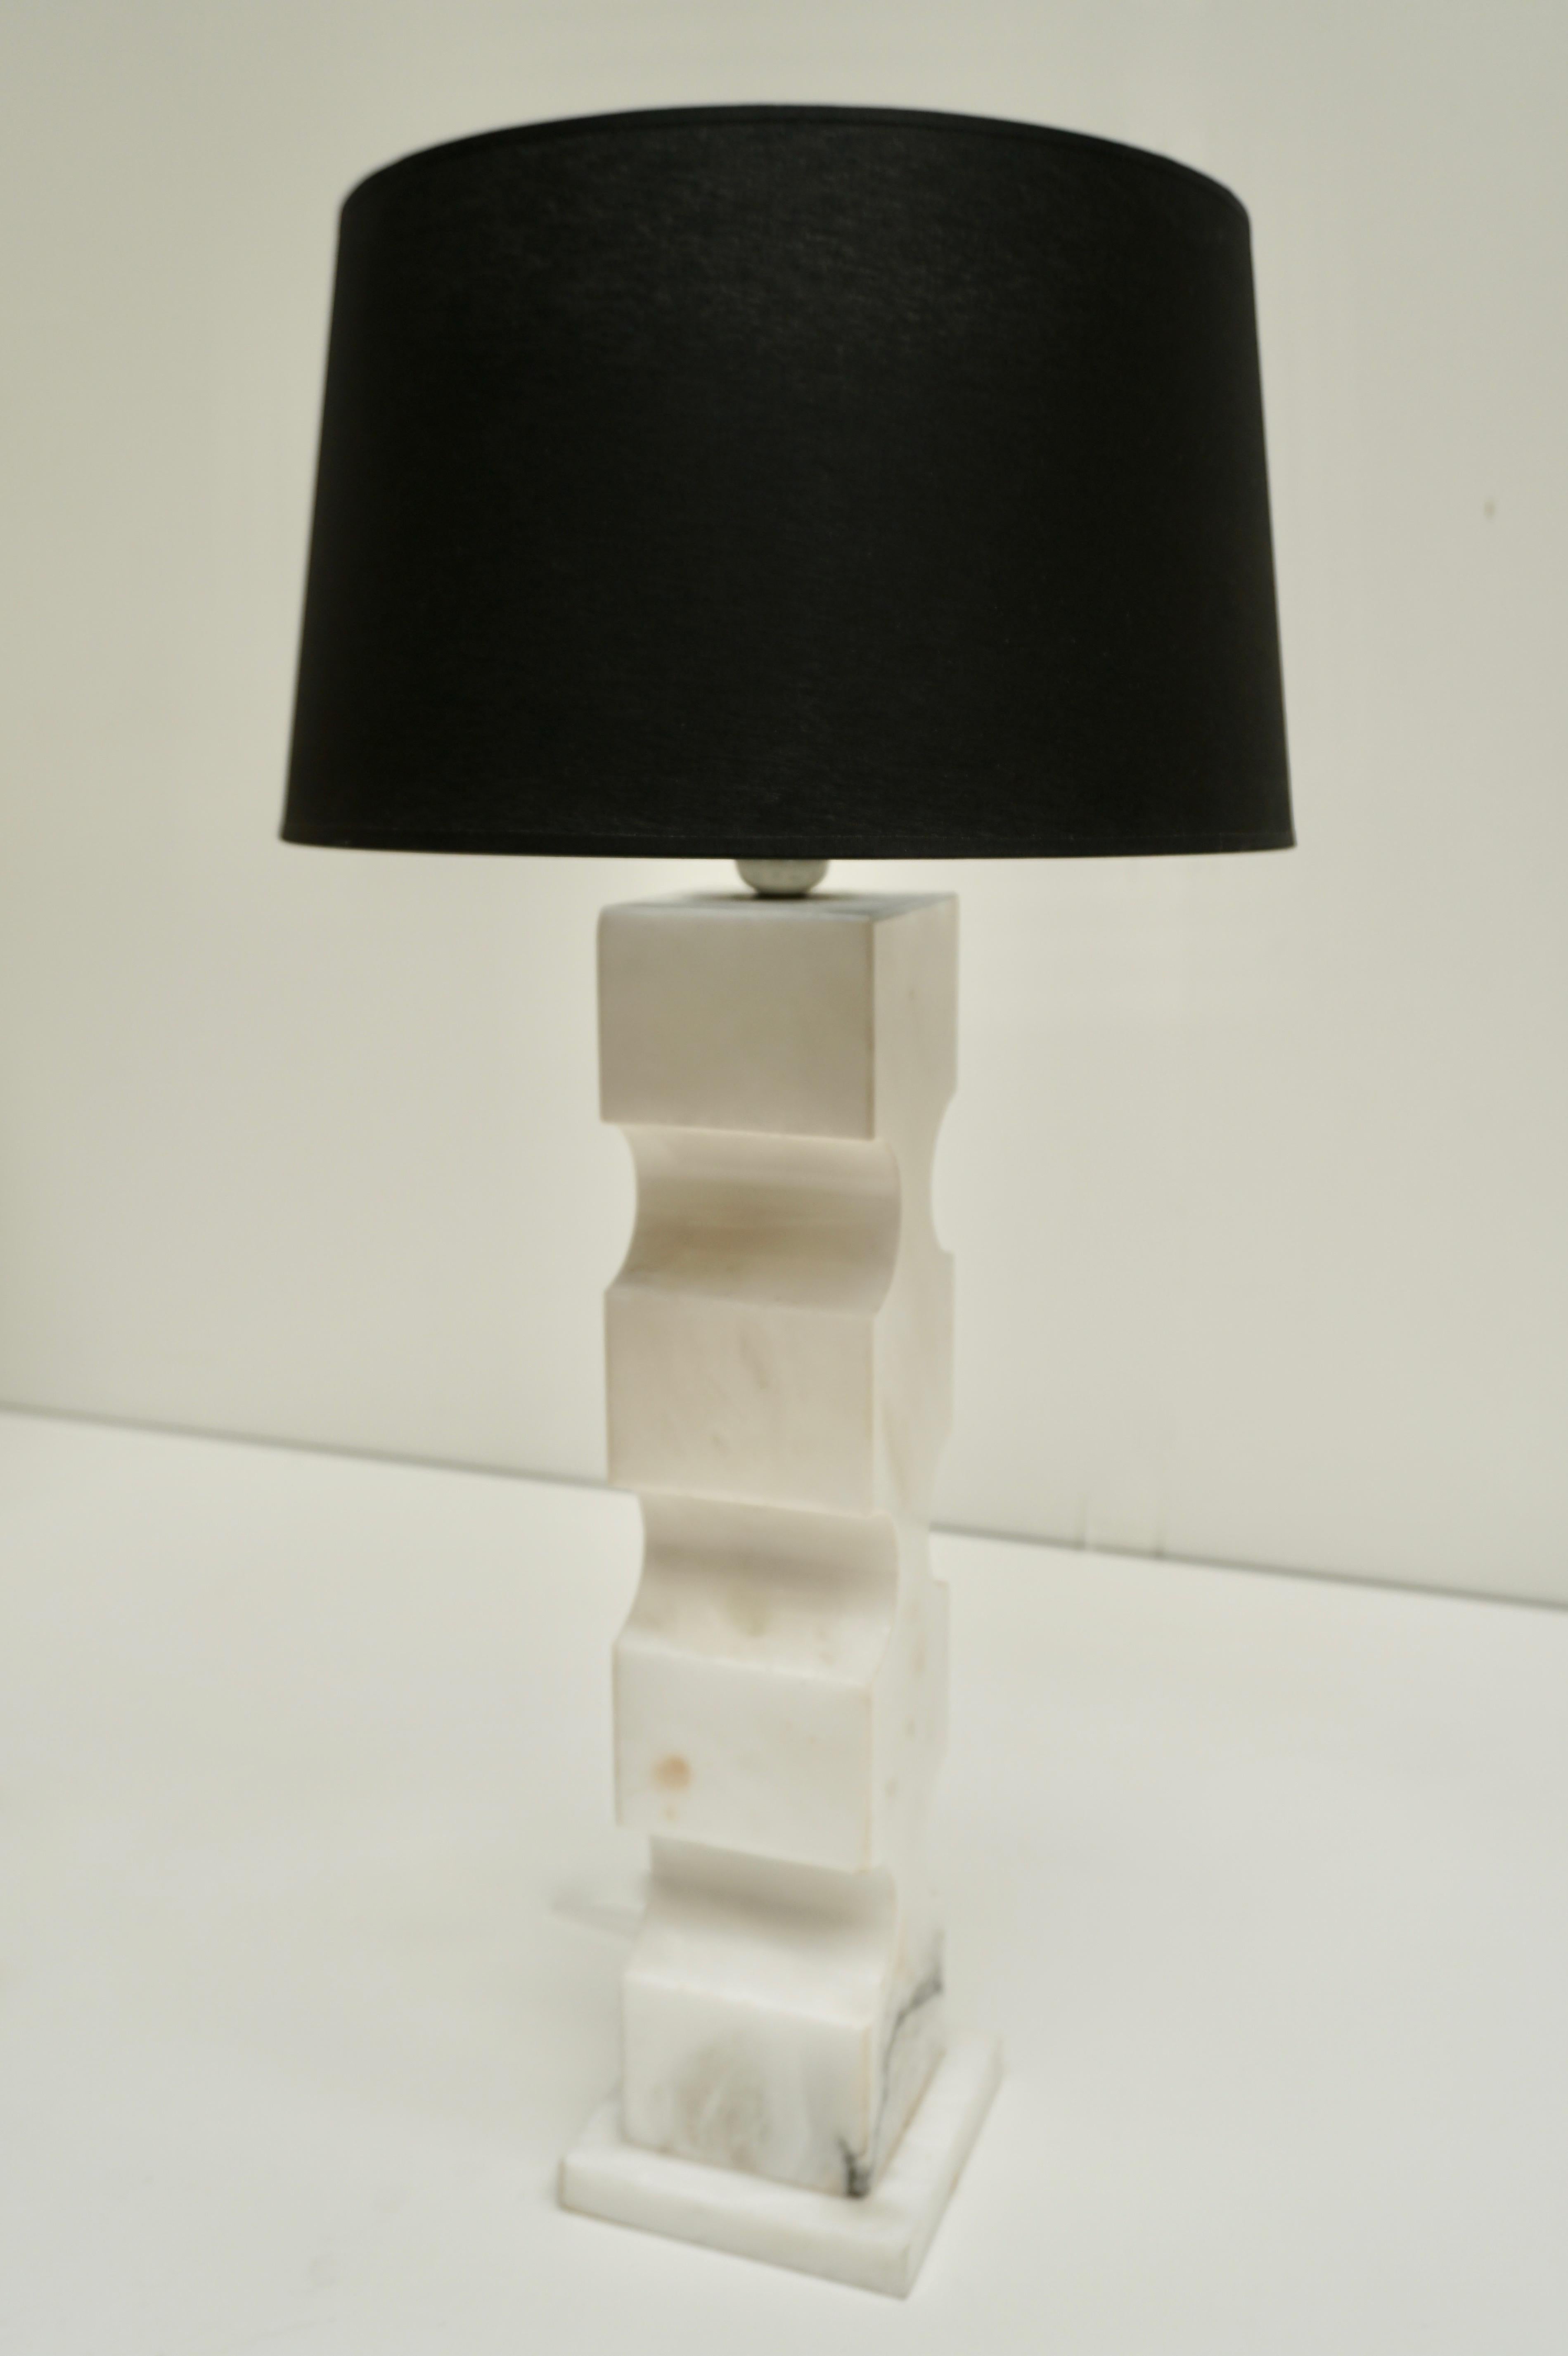 Italian marble table lamp.
Measures: Height with shade 73 cm. Diameter shade 35 cm.
The height of the lamp with fitting is 56 cm, and without 50 cm.
The width and depth of the base is 14 cm.

The lampshade is not included in the price.